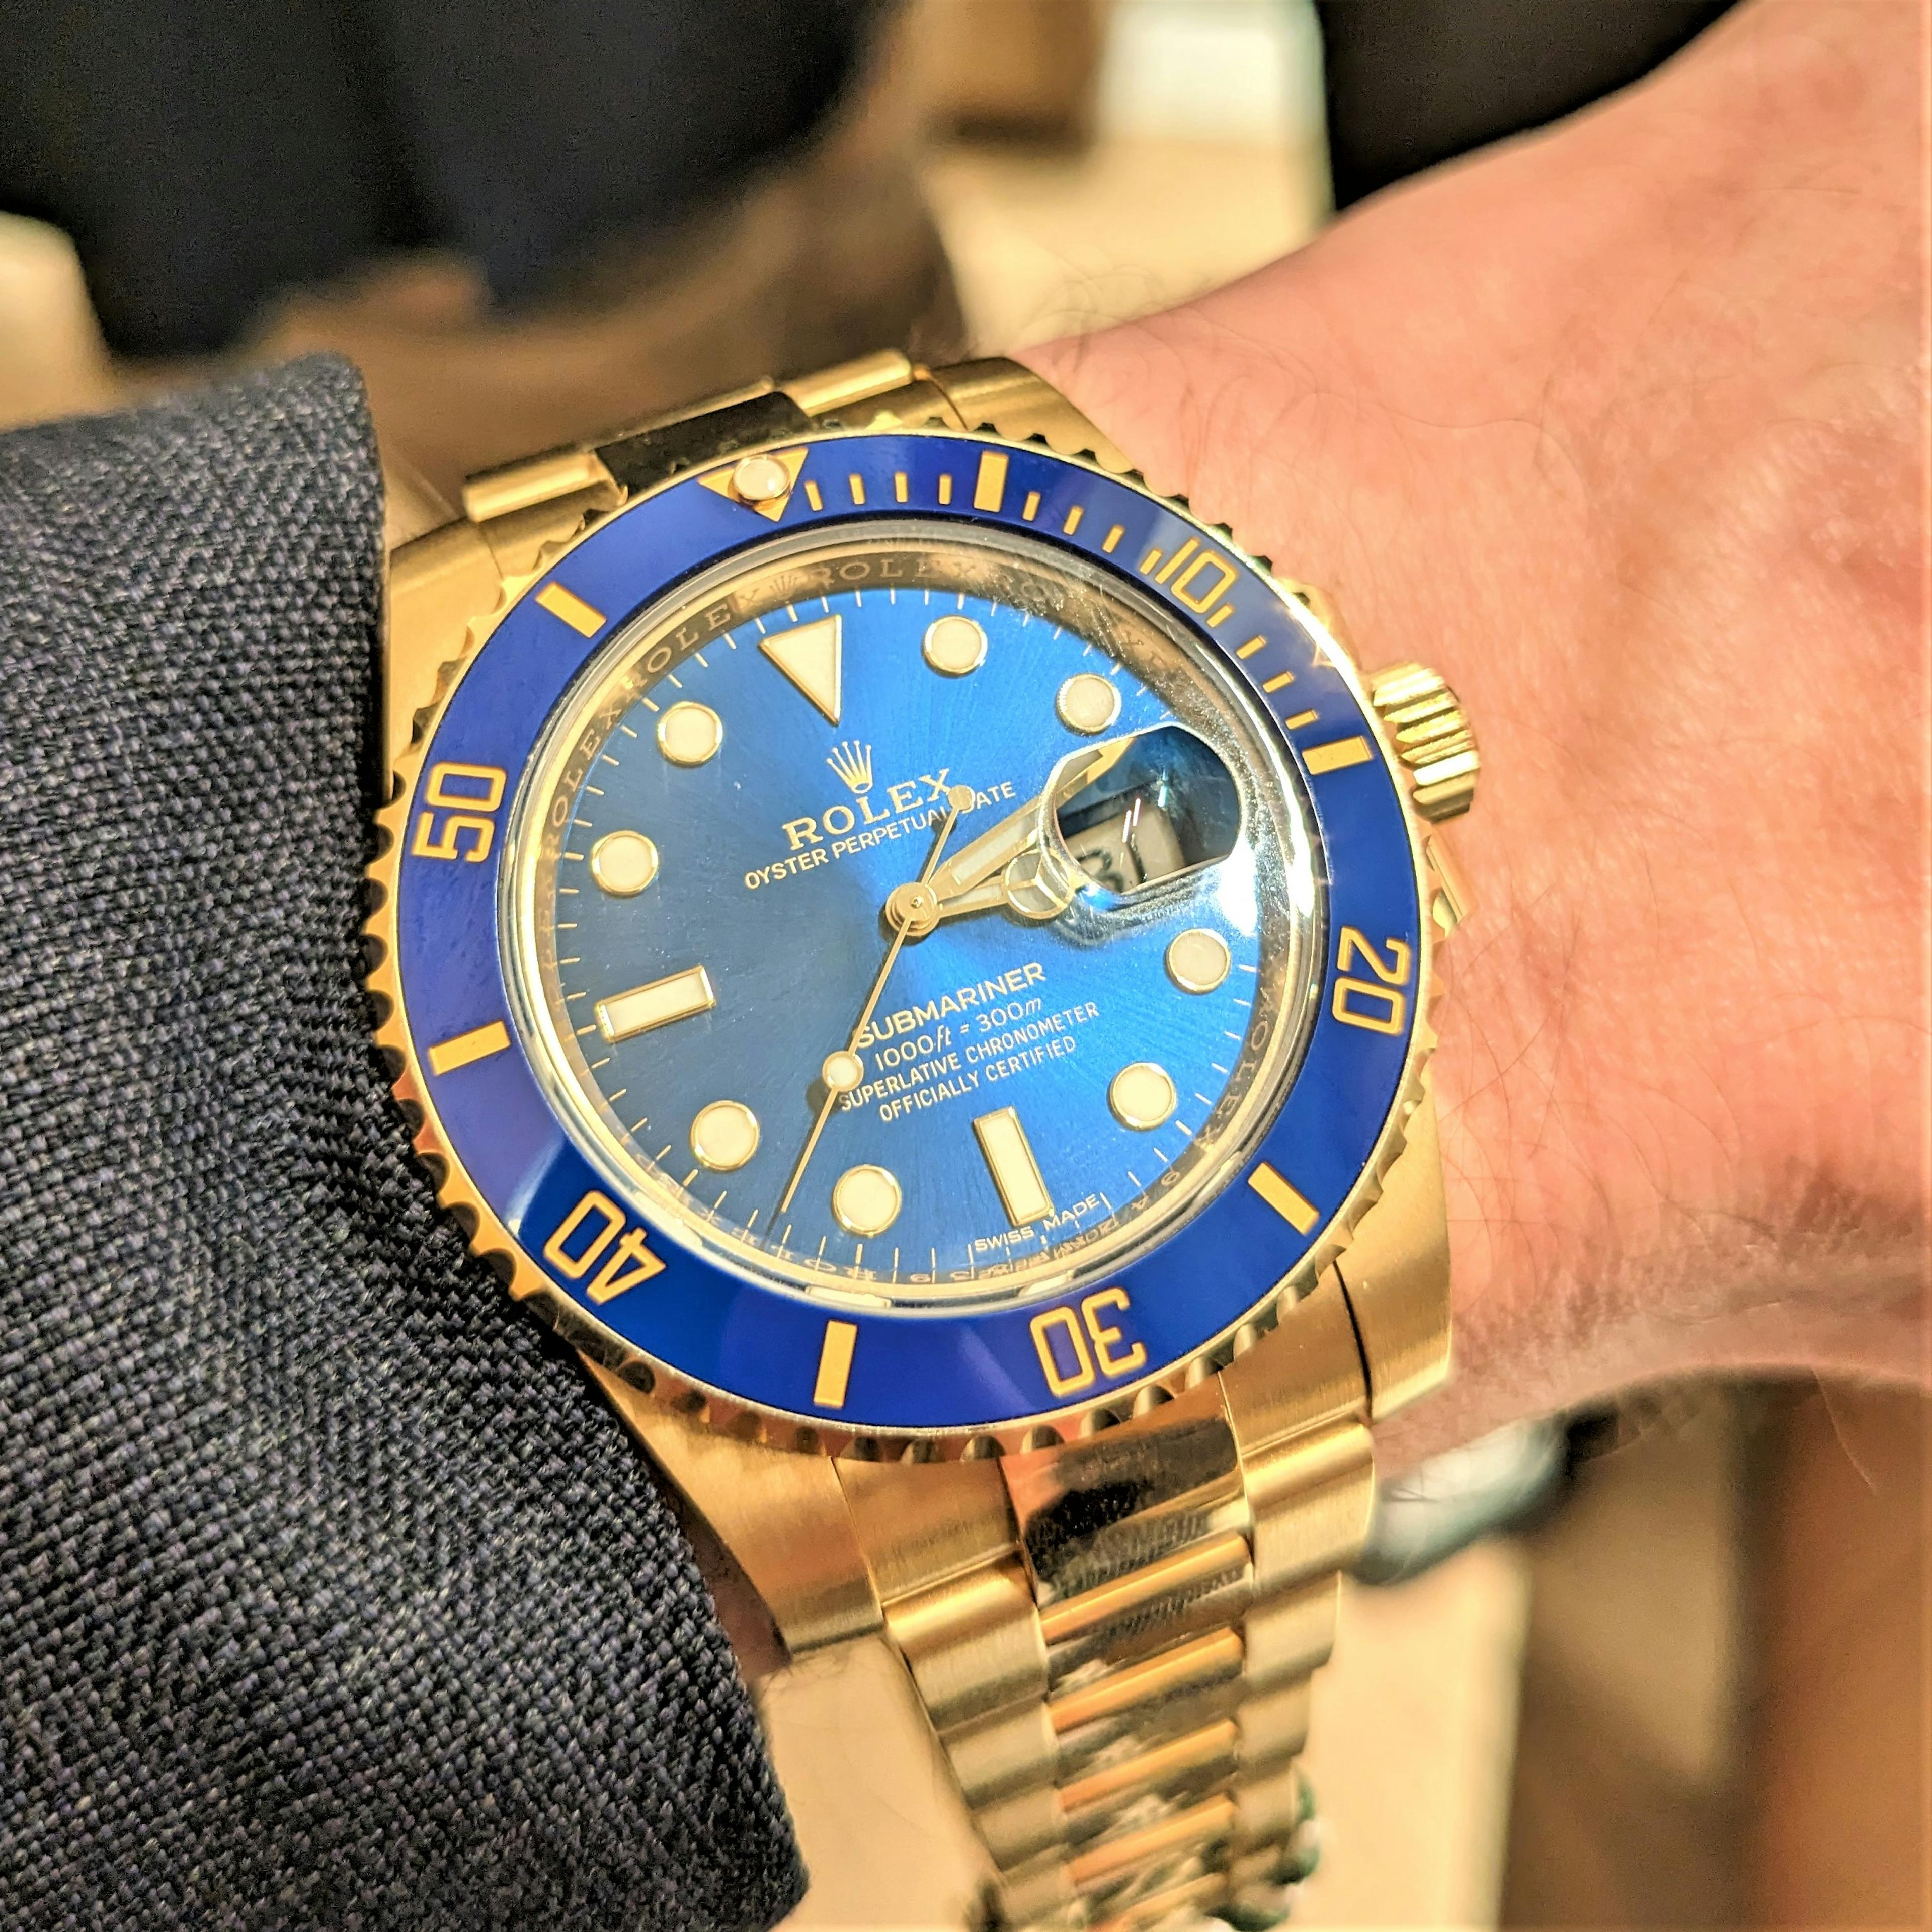 A Solid Gold Rolex Submariner